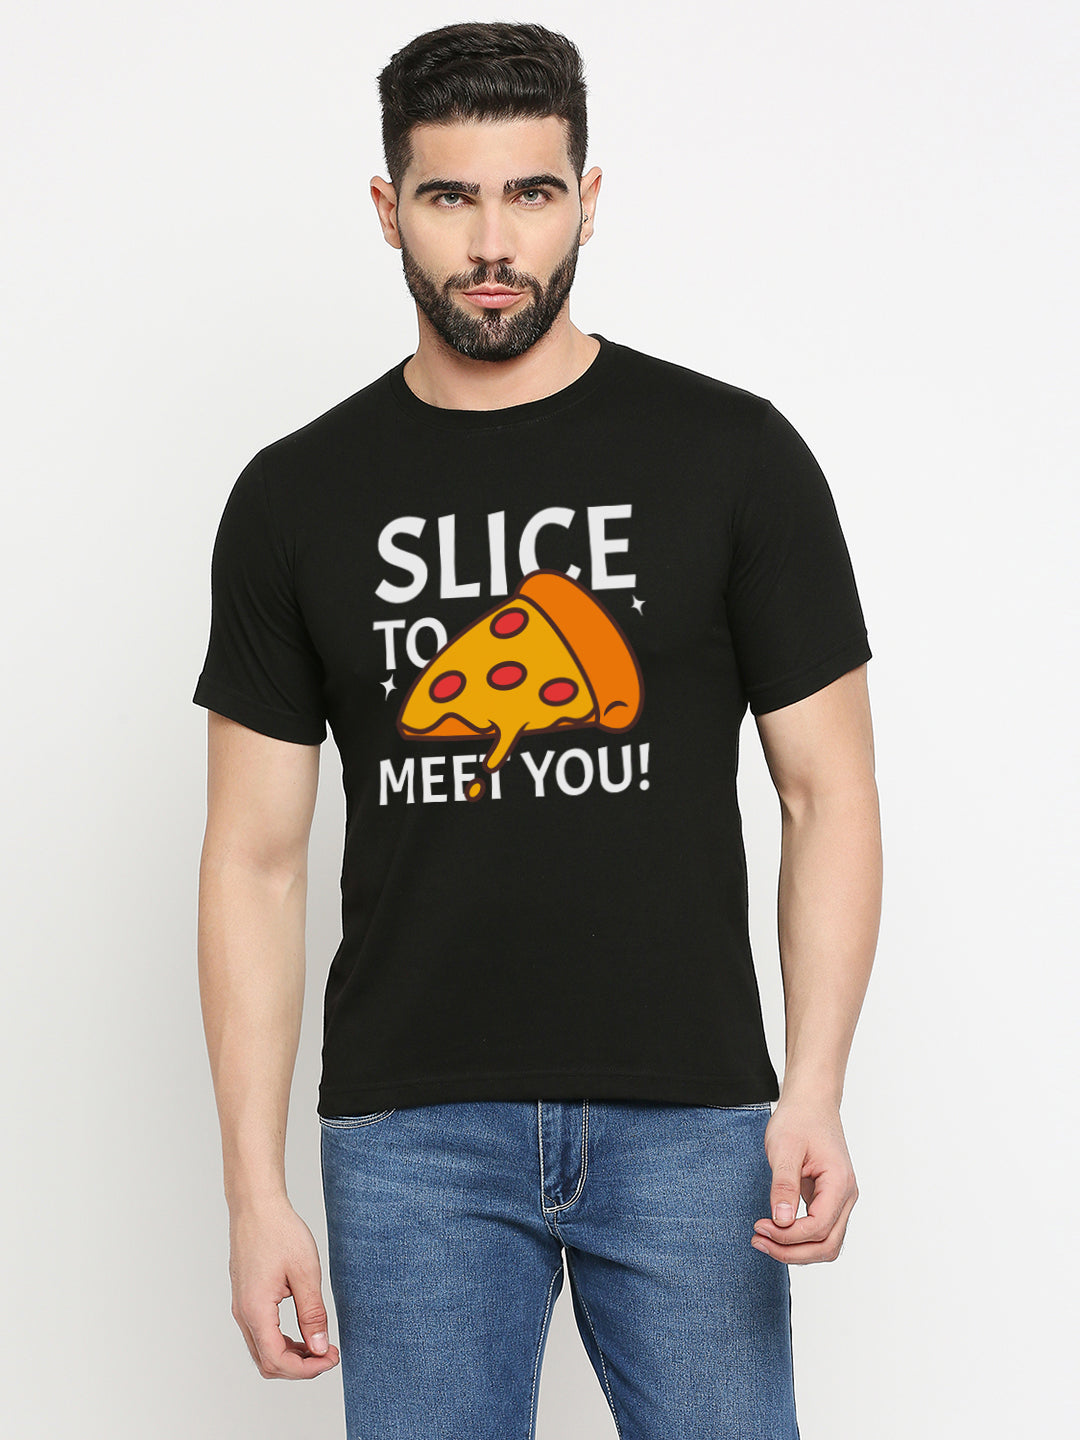 Slice to Meet You Funny T-Shirt